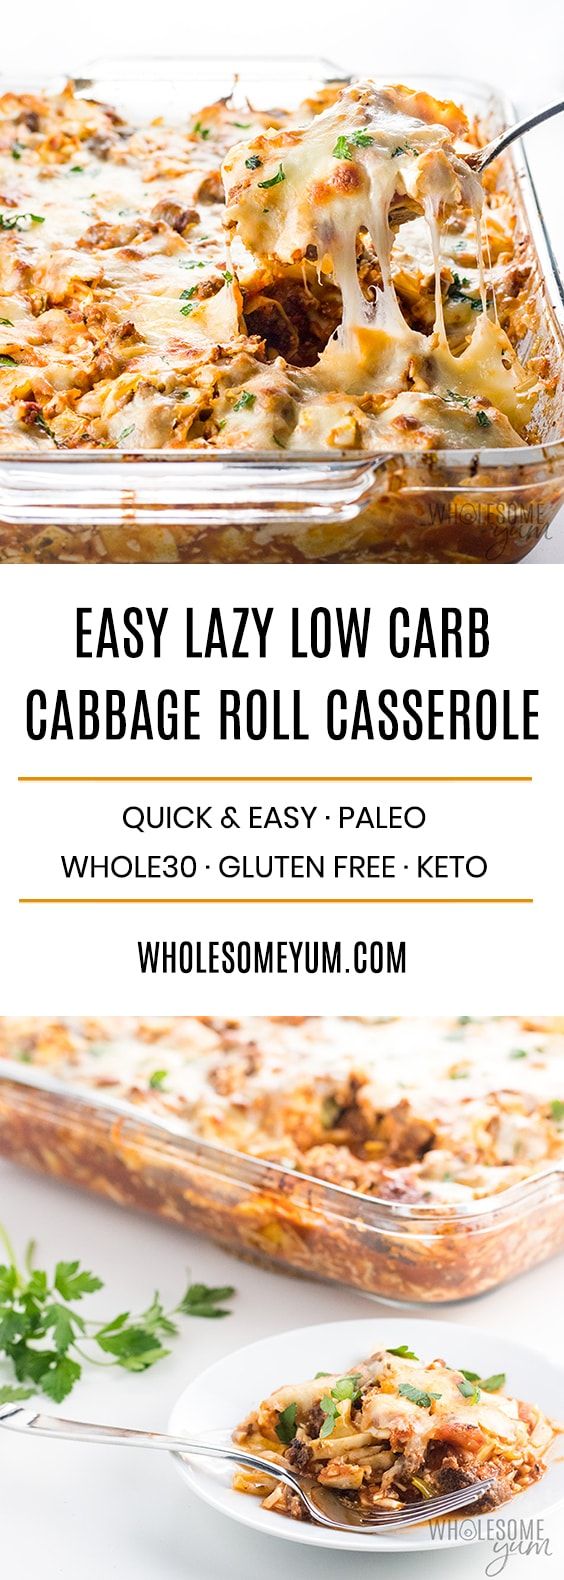 EASY LAZY CABBAGE ROLL CASSEROLE RECIPE – LOW CARB - Book Of Recipes